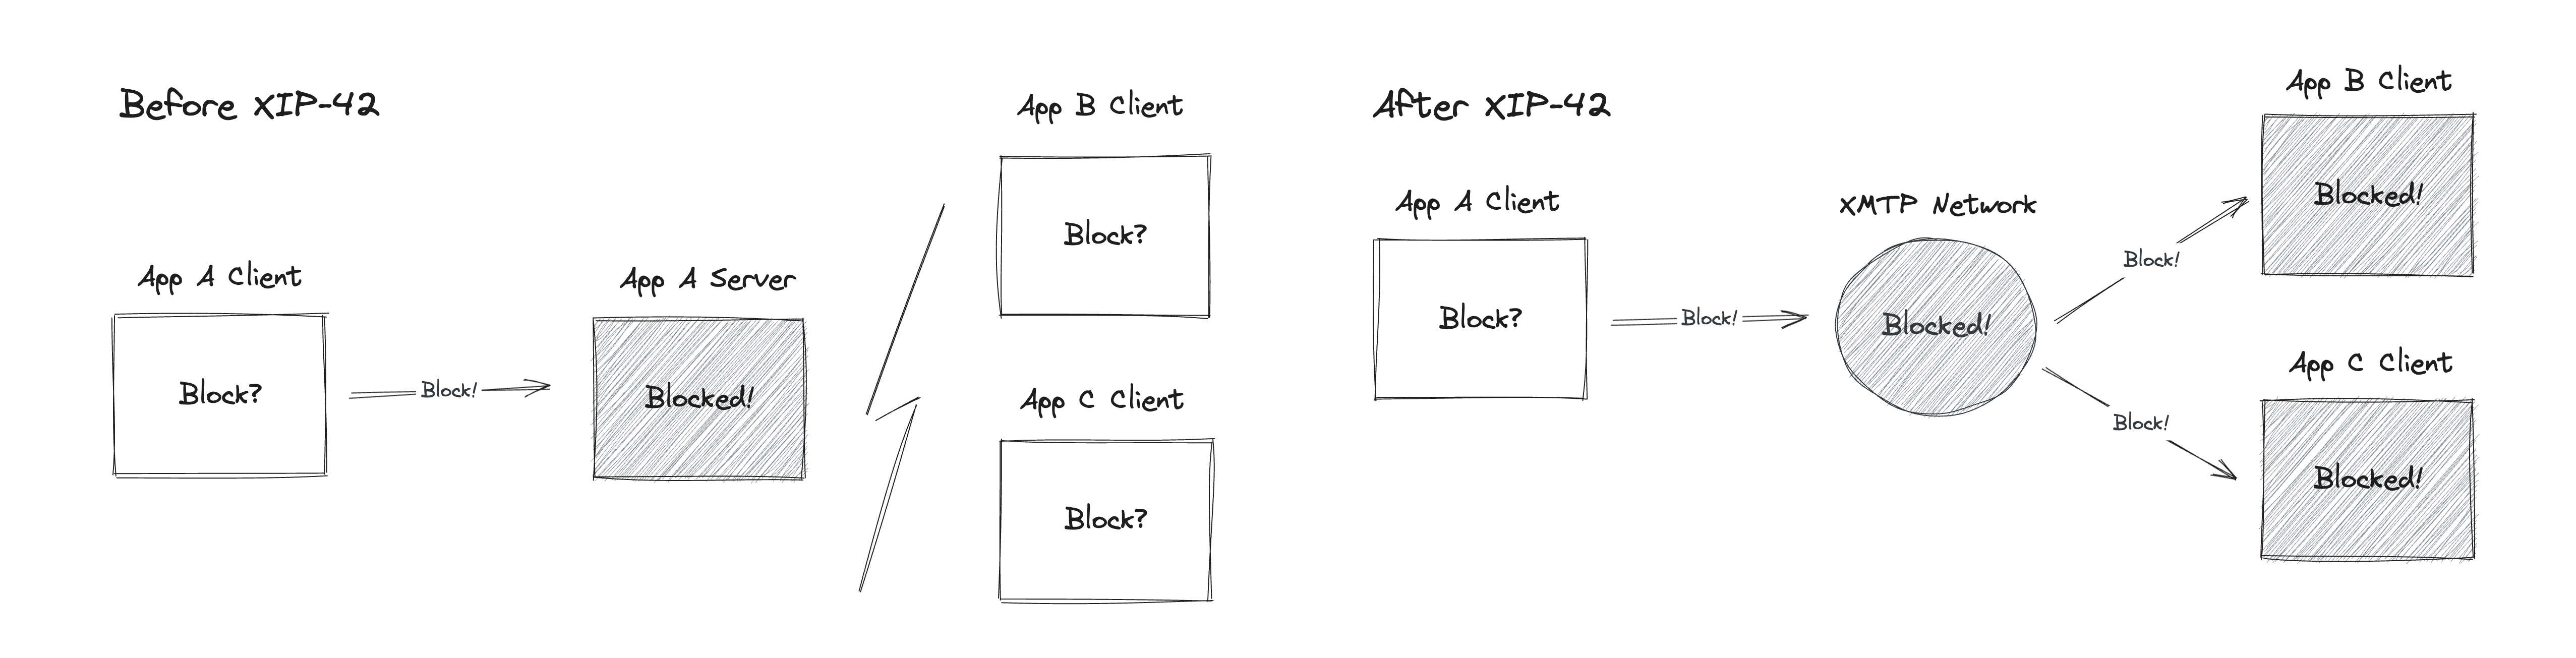 Diagram illustrating how XIP-42 brings users’ allow/block preferences to the network level